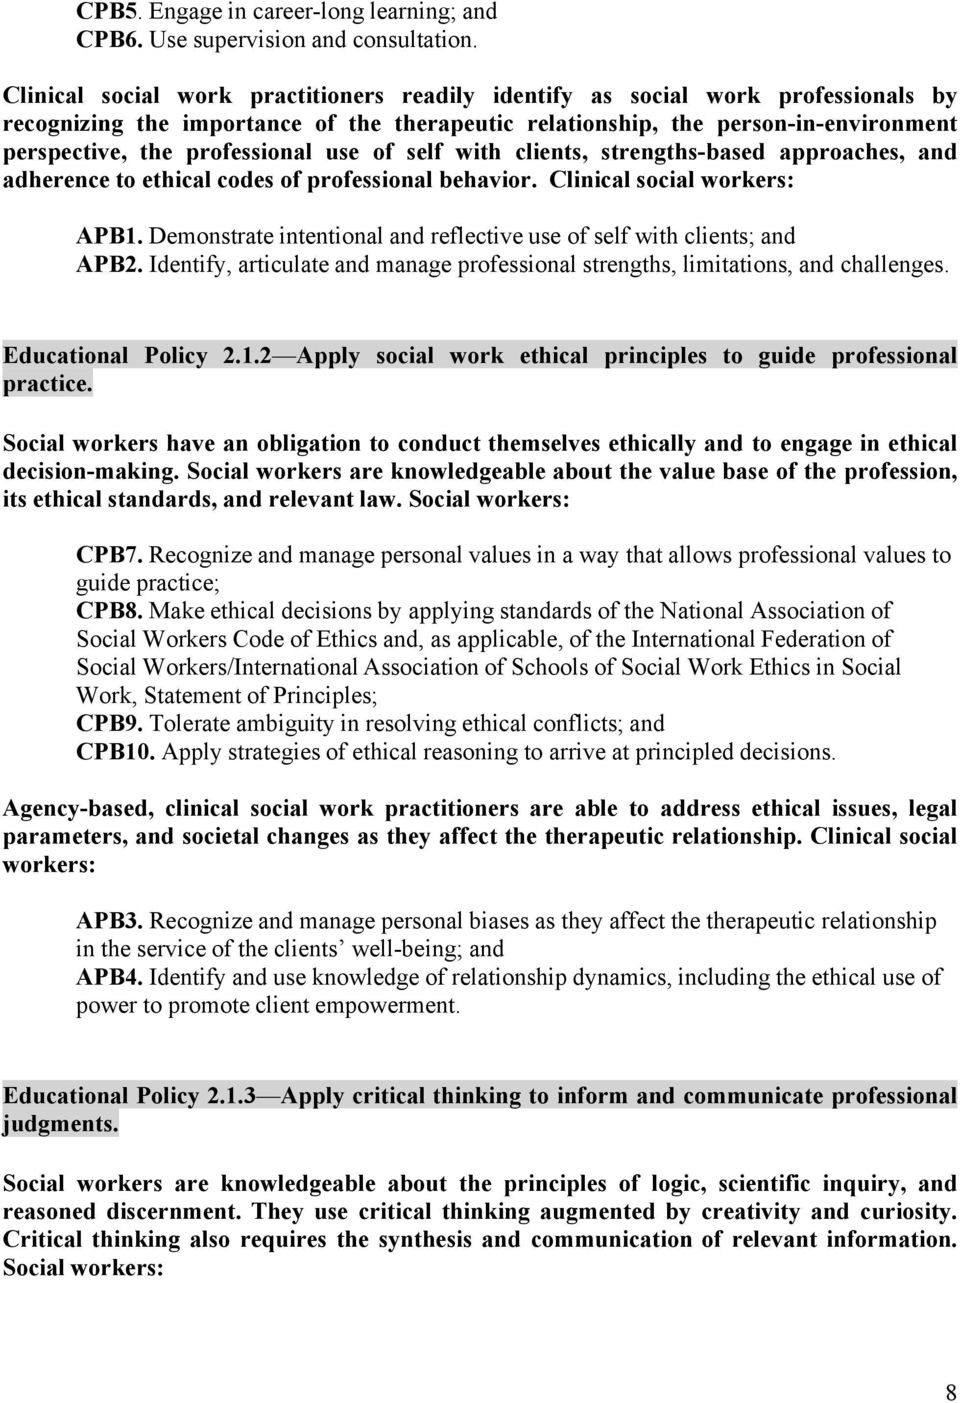 use of self with clients, strengths-based approaches, and adherence to ethical codes of professional behavior. Clinical social workers: APB1.